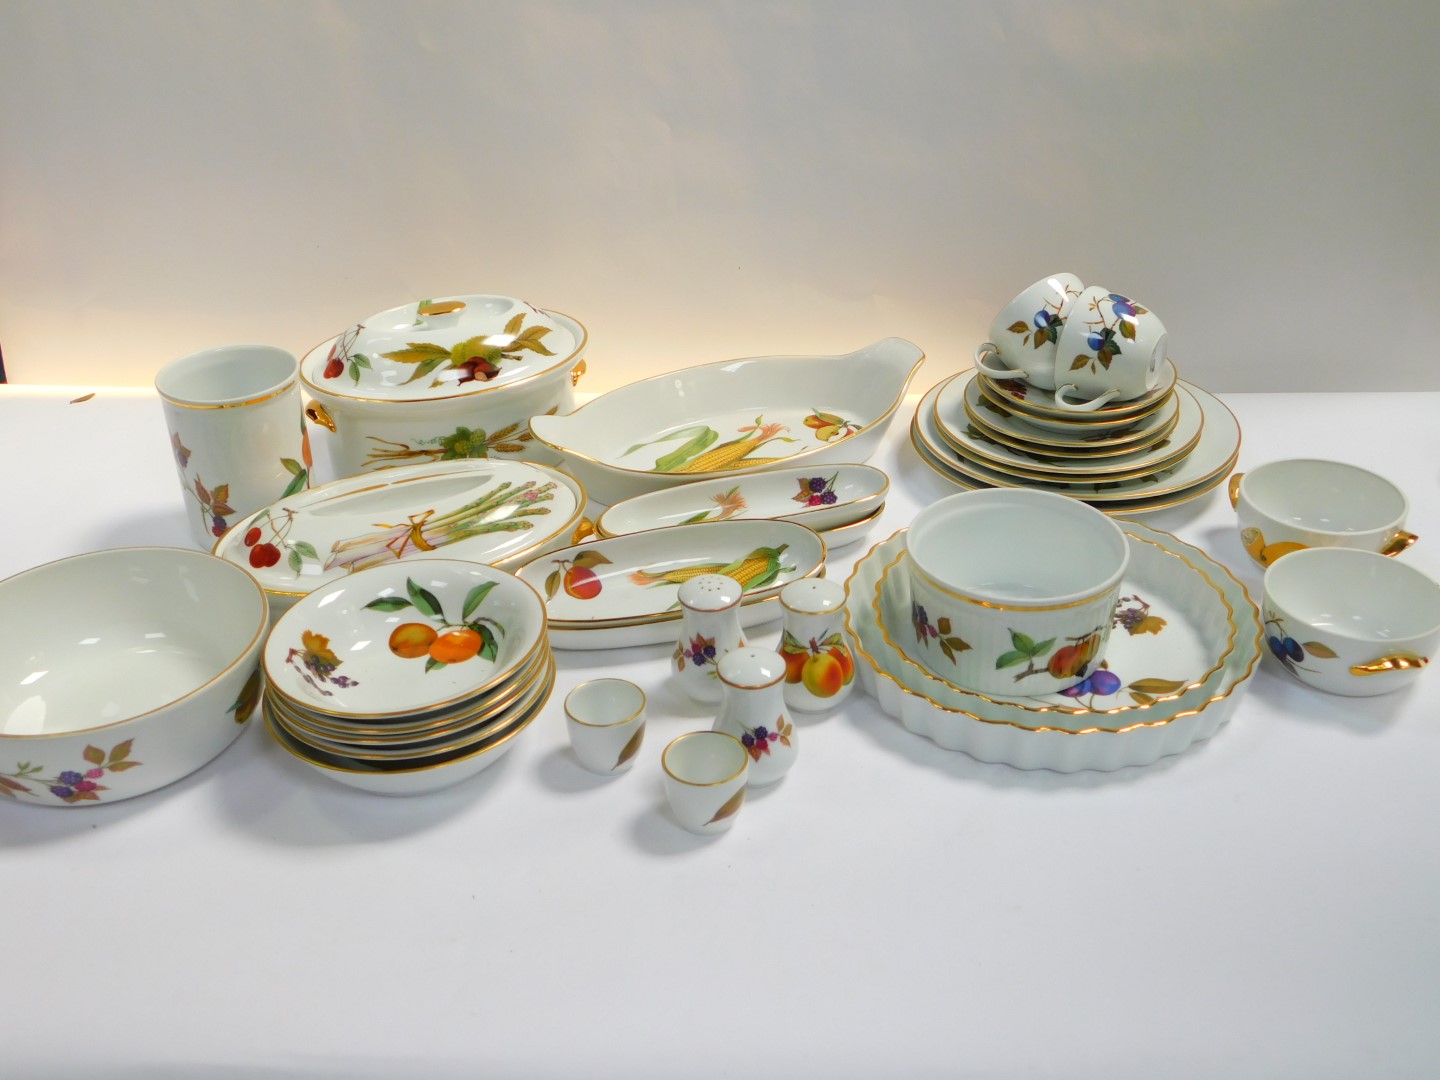 A group of Royal Worcester oven to table ware decorated in the Evesham pattern, including flan